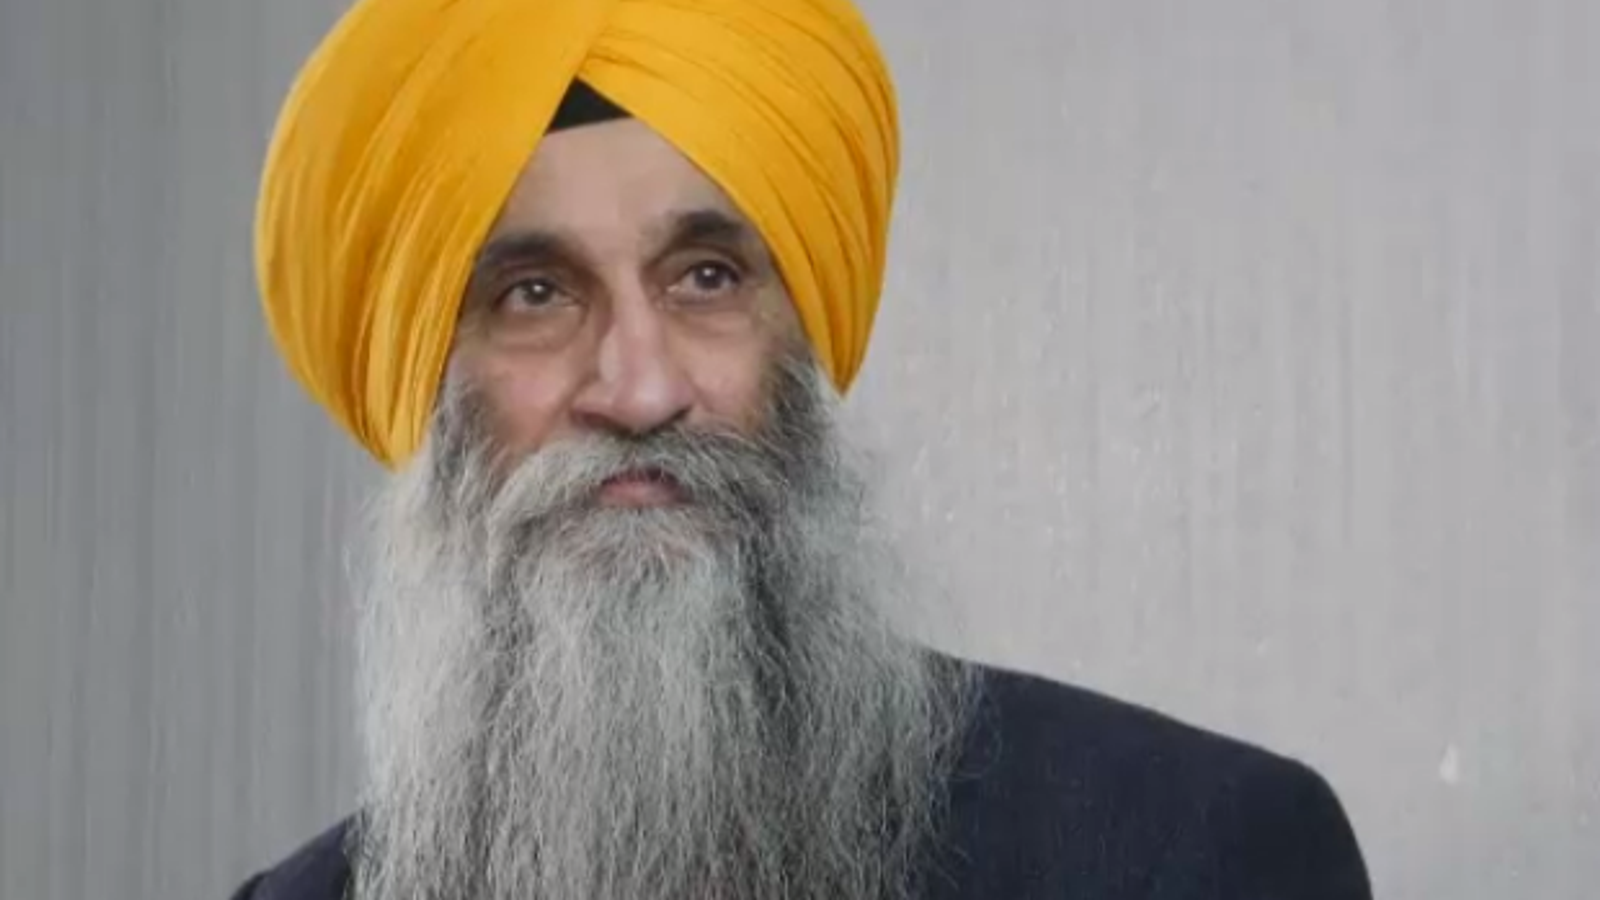 'We can be killed in the UK at any time': Sikh activist fears for life after being named on Indian 'hit list'